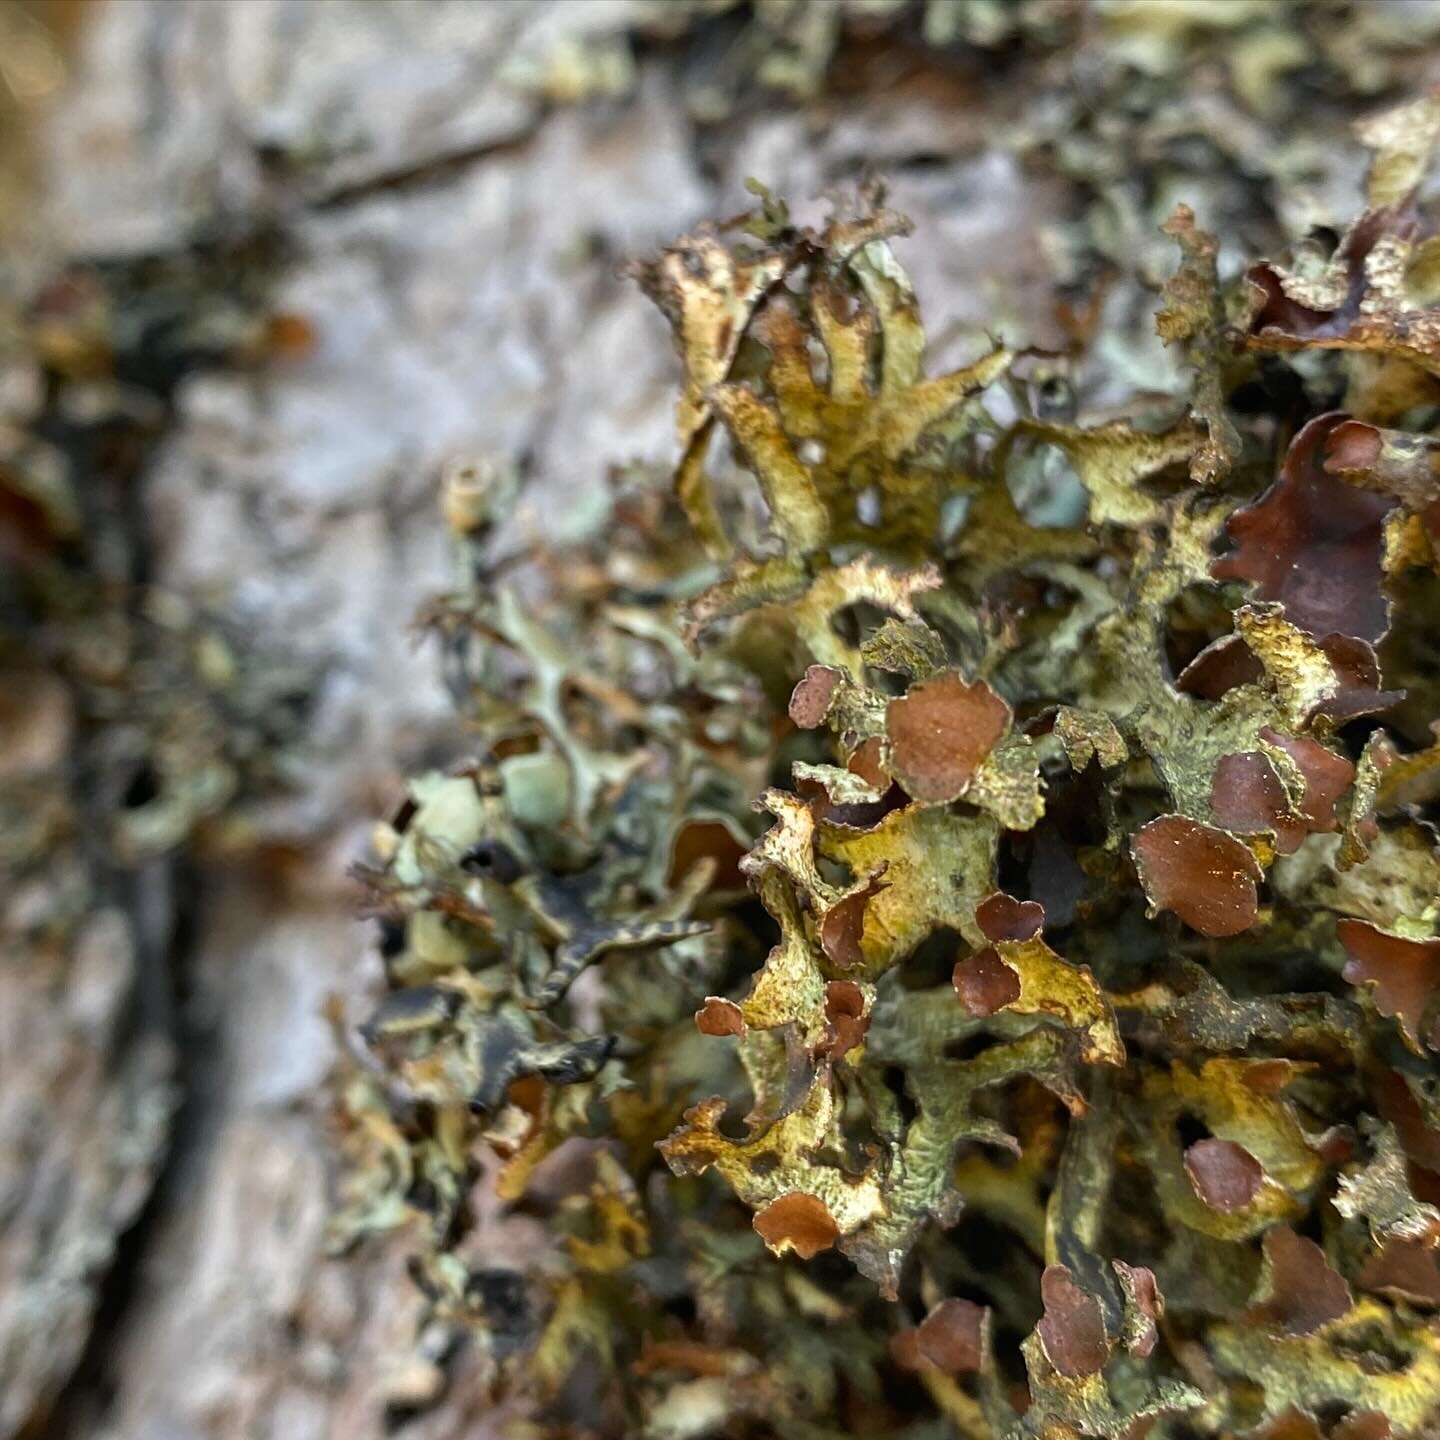 THIS Saturday, November 11th‼️
A Lense On Lichens: A lichen workshop and field walk at the Pepperwood Preserve in Sonoma County with our very own Jesse Miller✨
Visit @pepperwoodpreserveca and check the link in their bio to register!